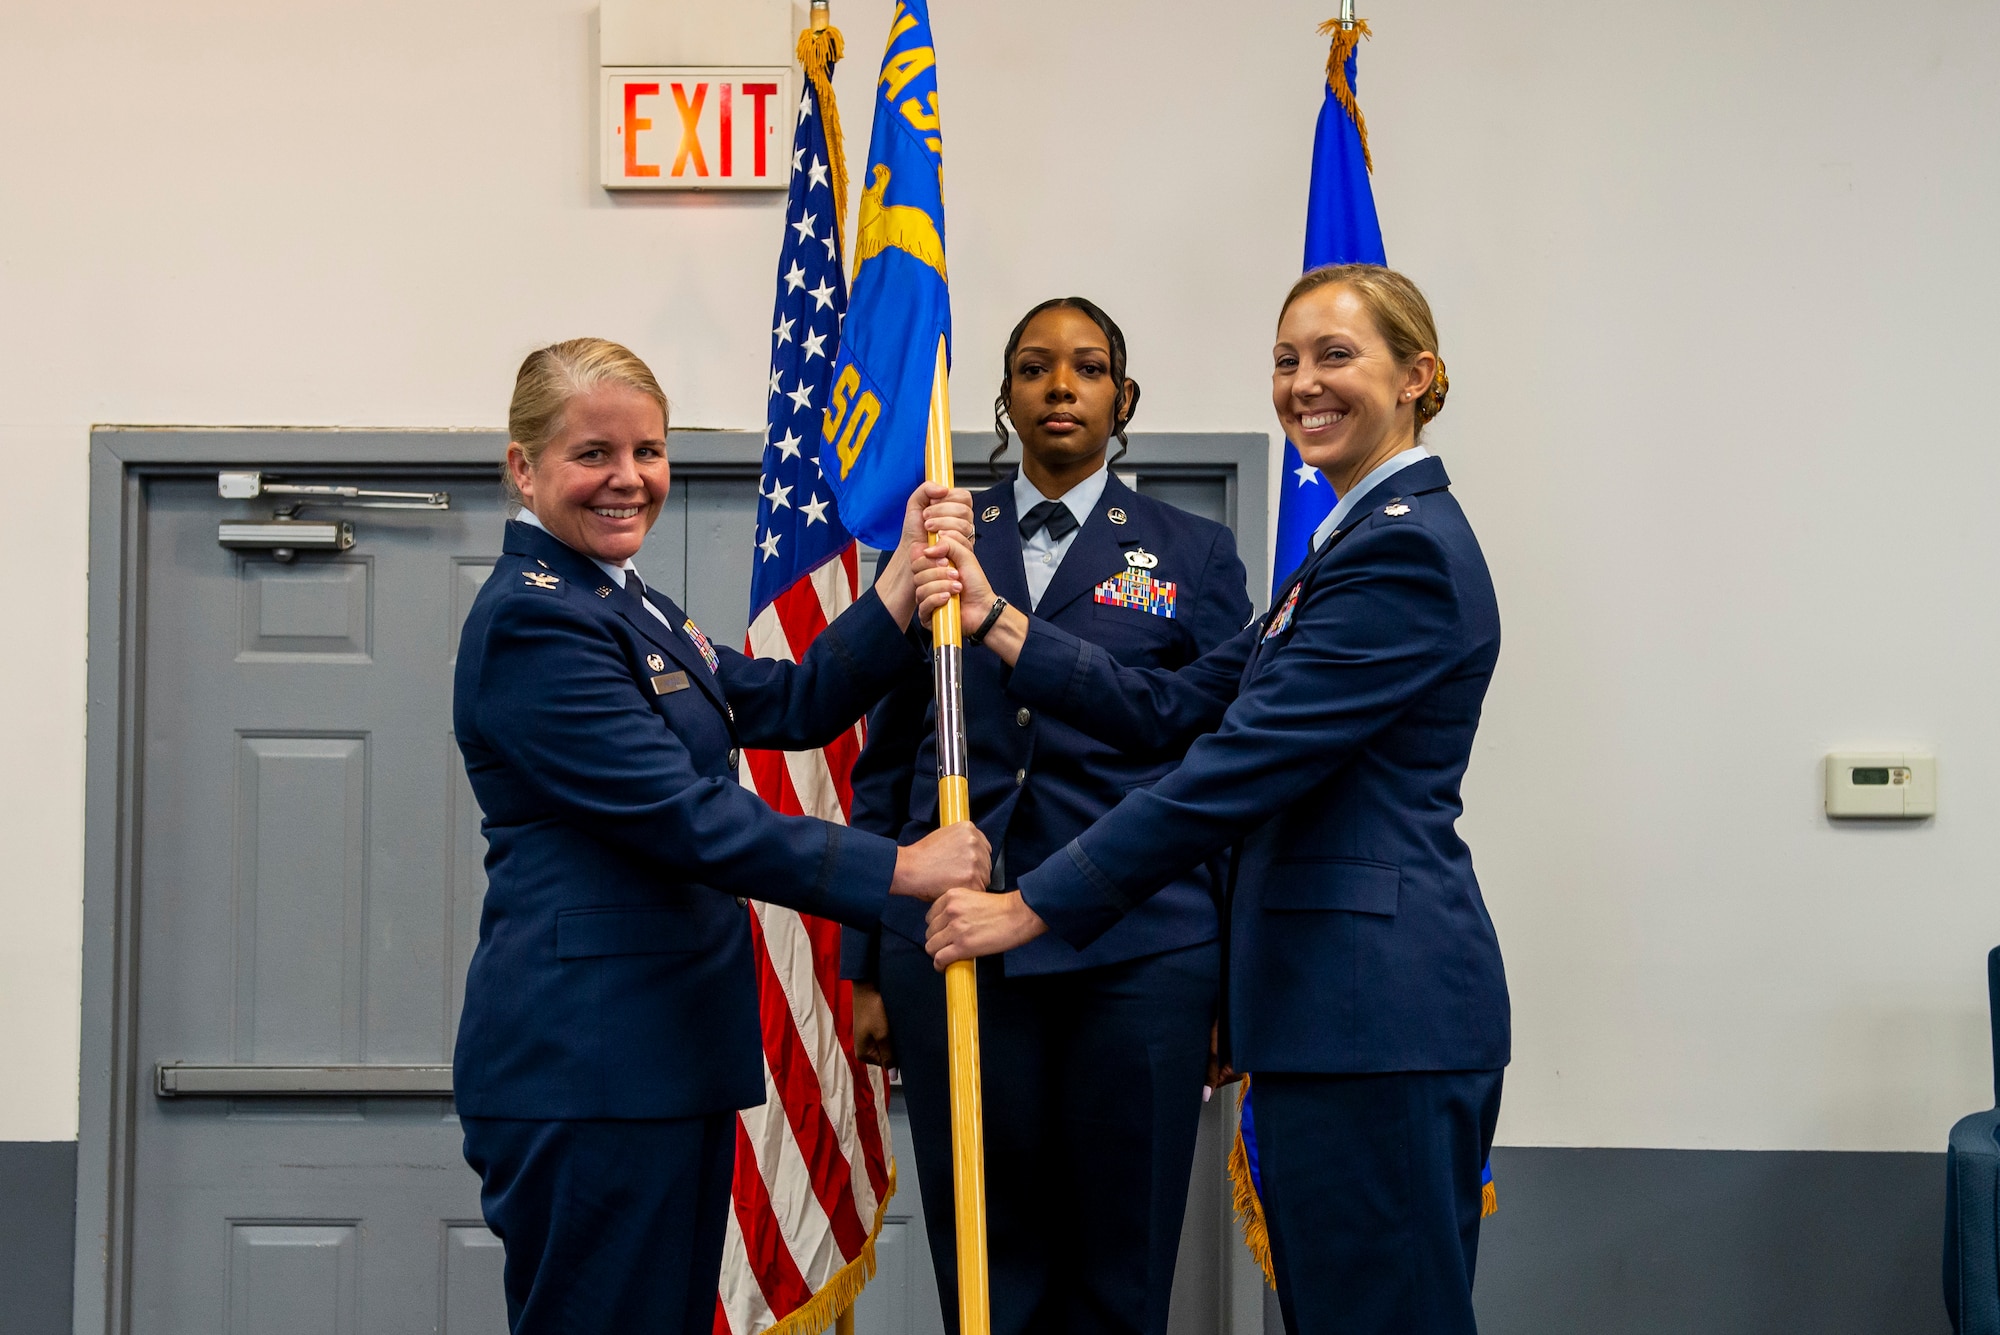 Lt. Col. Hayley Hartstein Integrated Command, Control, Computers, Communications, Intelligence, Surveillance, and Reconnaissance Analysis Squadron commander accepts the ceremonial guidon from Col. Catherine Gambold, Air and Cyberspace Intelligence Group commander, in an Aug. 4, 2022 ceremony in Dayton, Ohio. Hartstein previously served as an exchange officer, working as the director of the Spanish Air Force Academy language section in San Javier, Spain